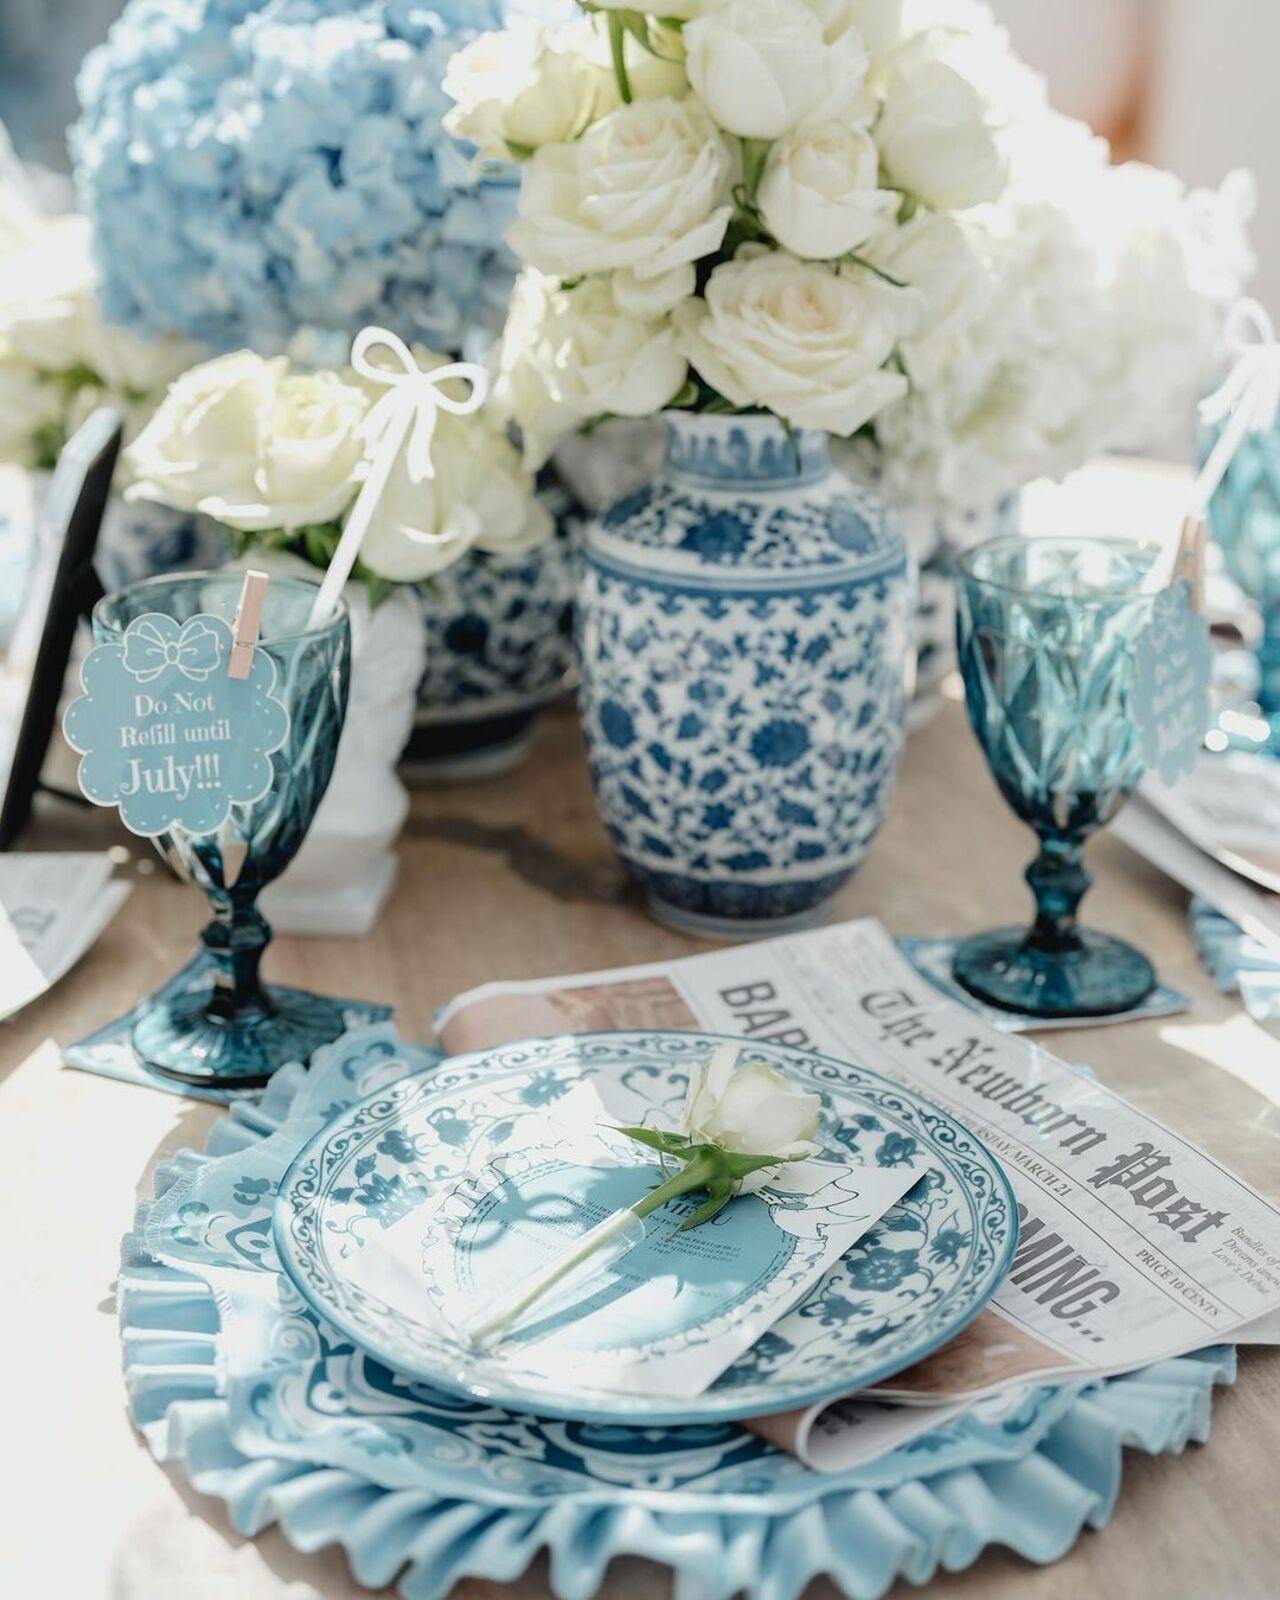 Guests were treated to intricate decor including a note on the wine glasses which read - “Do not refill until July”, which is when the baby is due. 